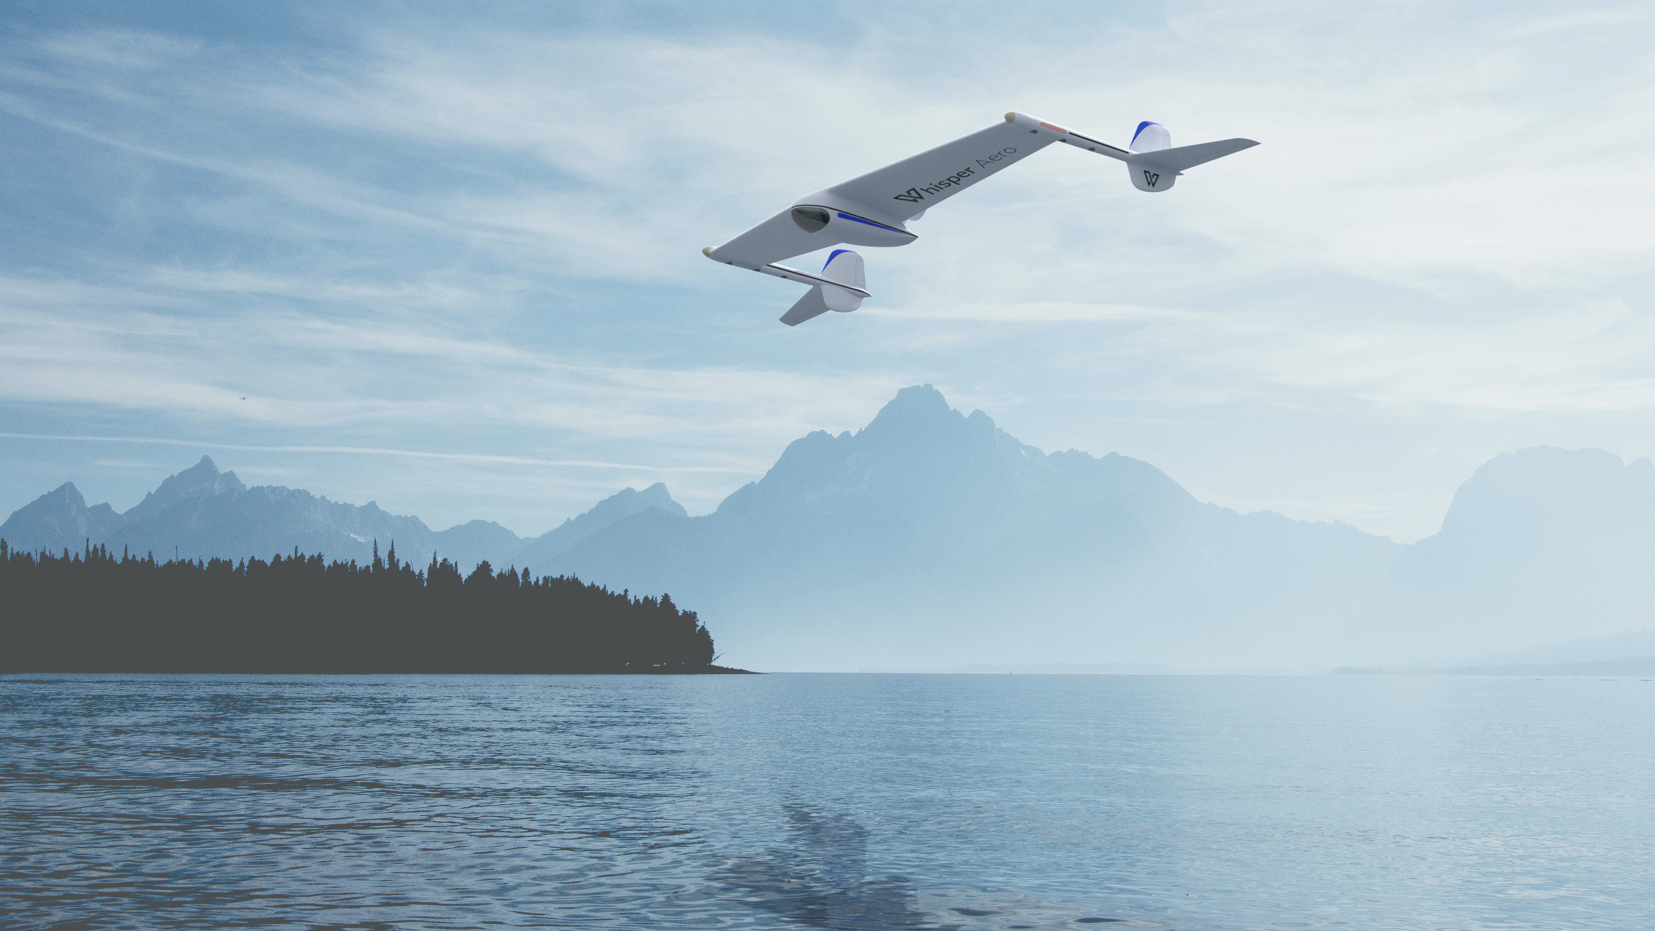 First Look: Whisper Aero’s New Electric Surveillance Drone